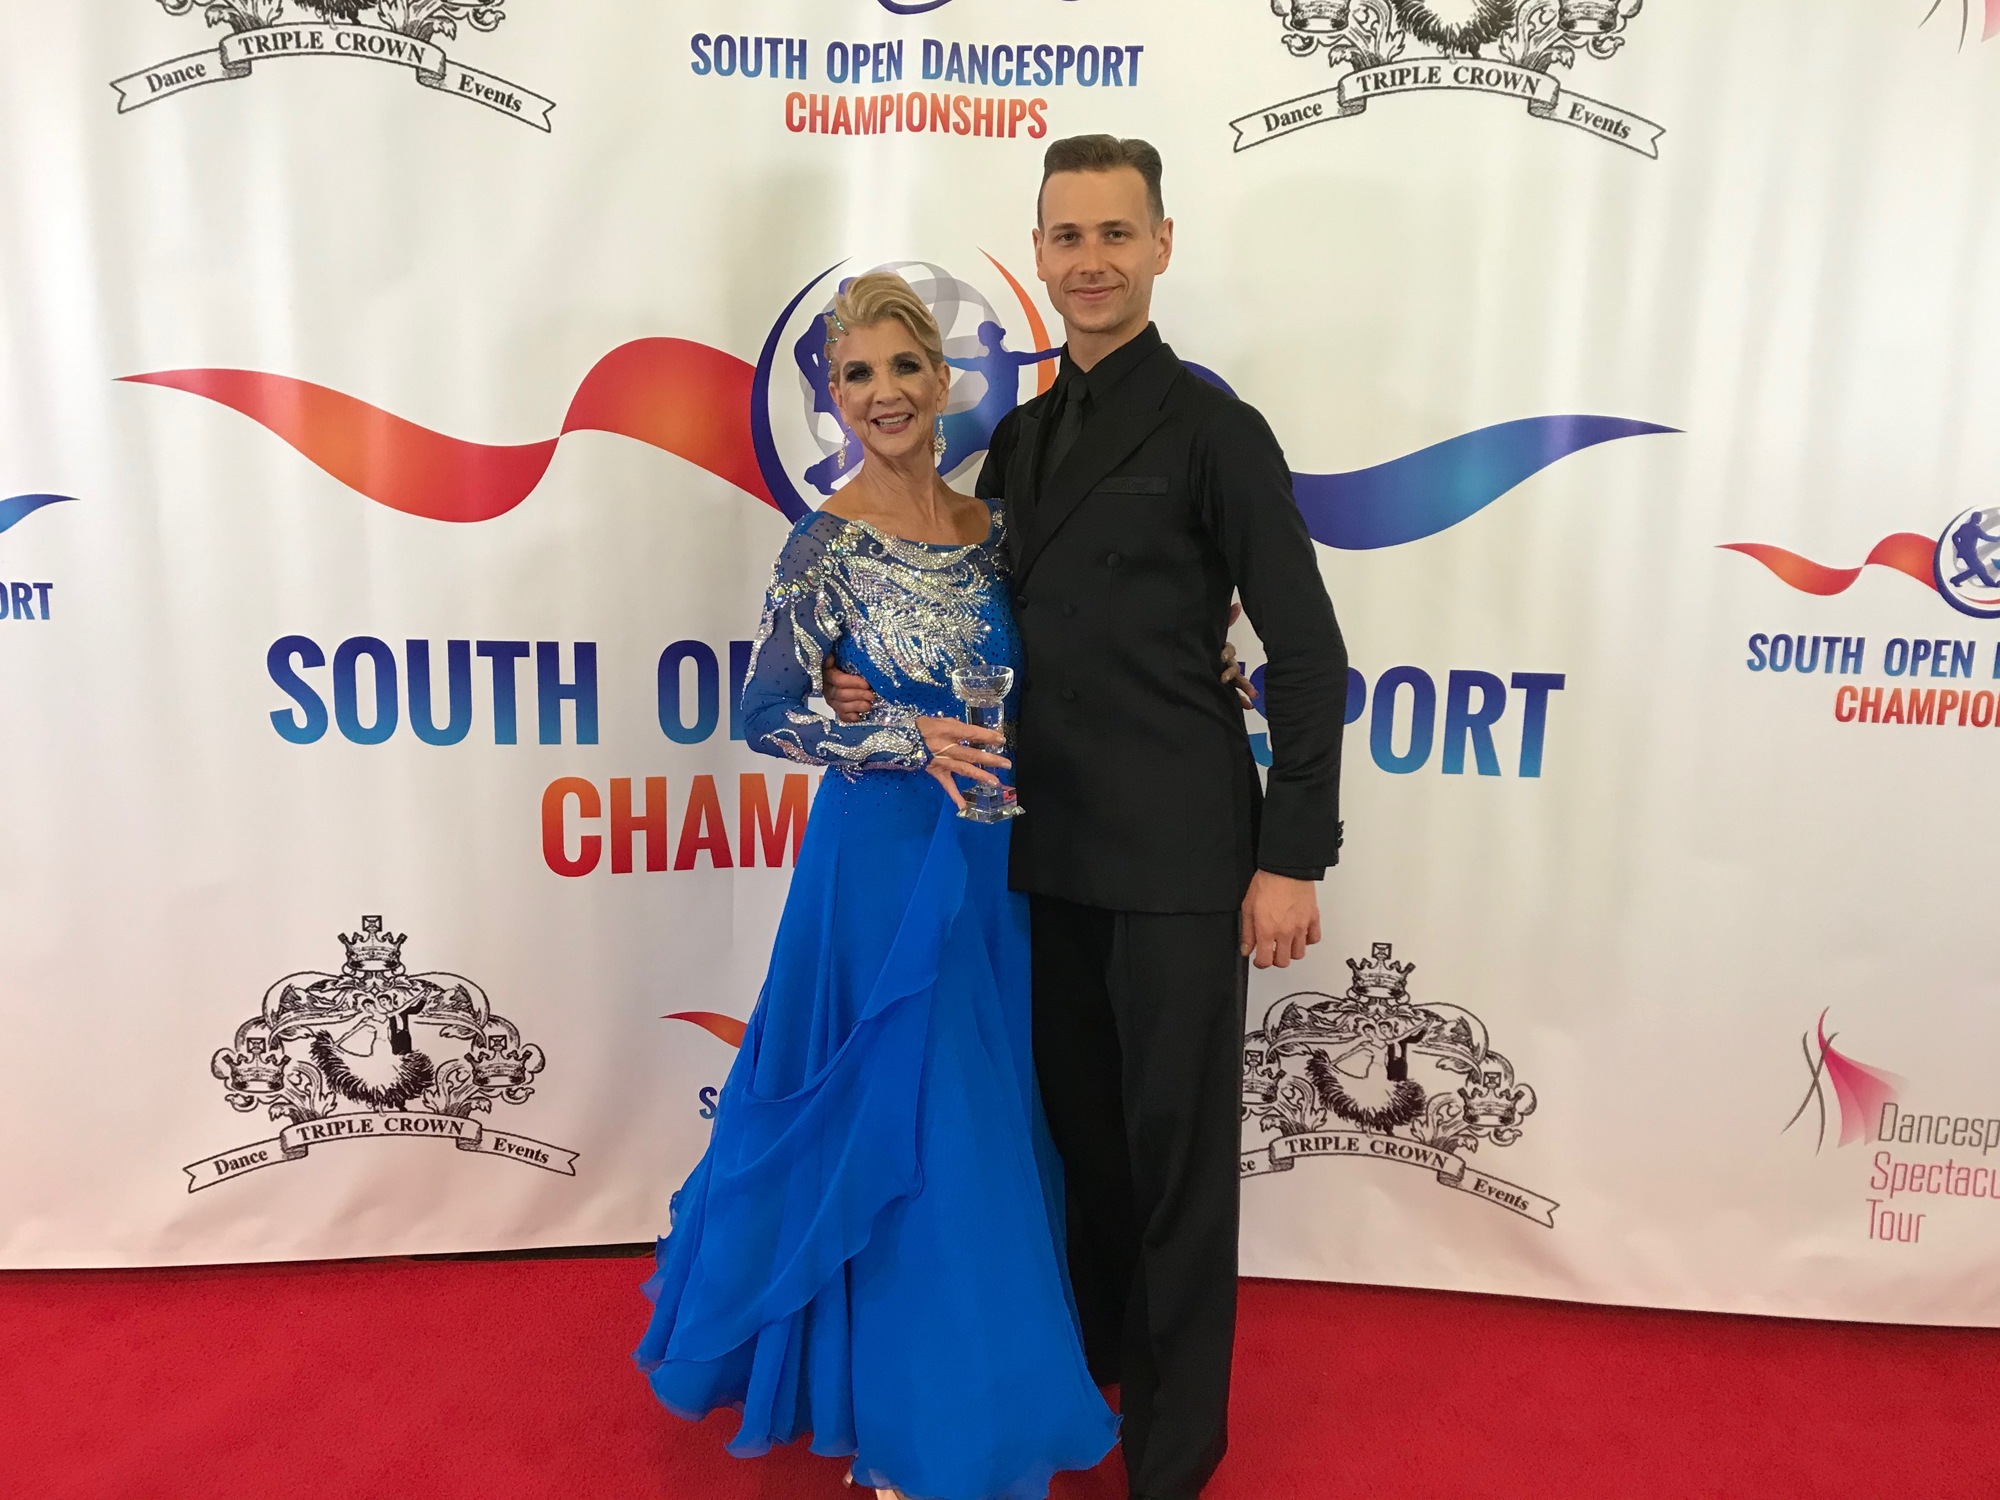 Beth King and Artur Kozun in the 2019 South Open Dancesport Championships in Orlando, where she placed first and second in different competitions. Photo courtesy of Beth King